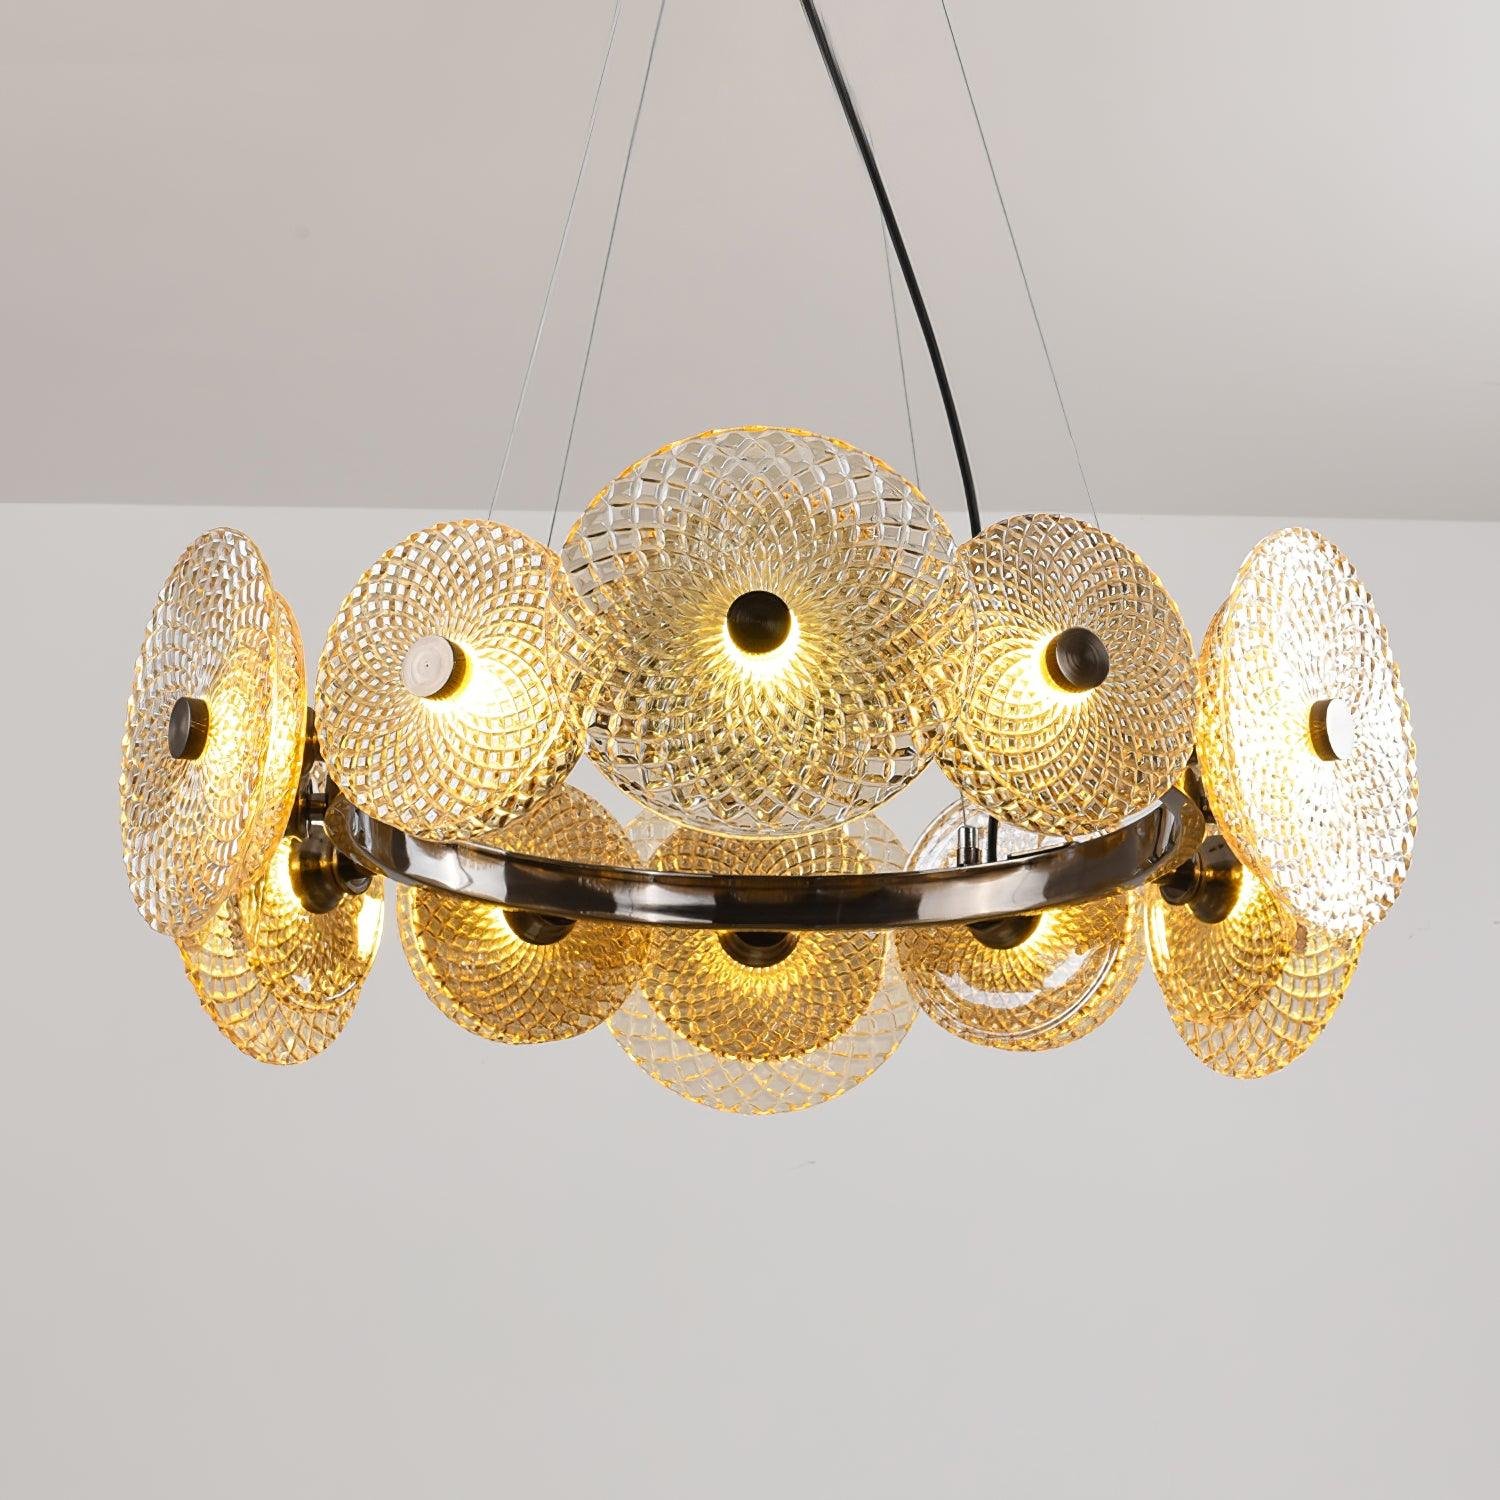 Bronzed Paige Chandelier with 8 Heads, 33.5-inch Diameter x 11-inch Height (85cm x 28cm), emitting Cool Light